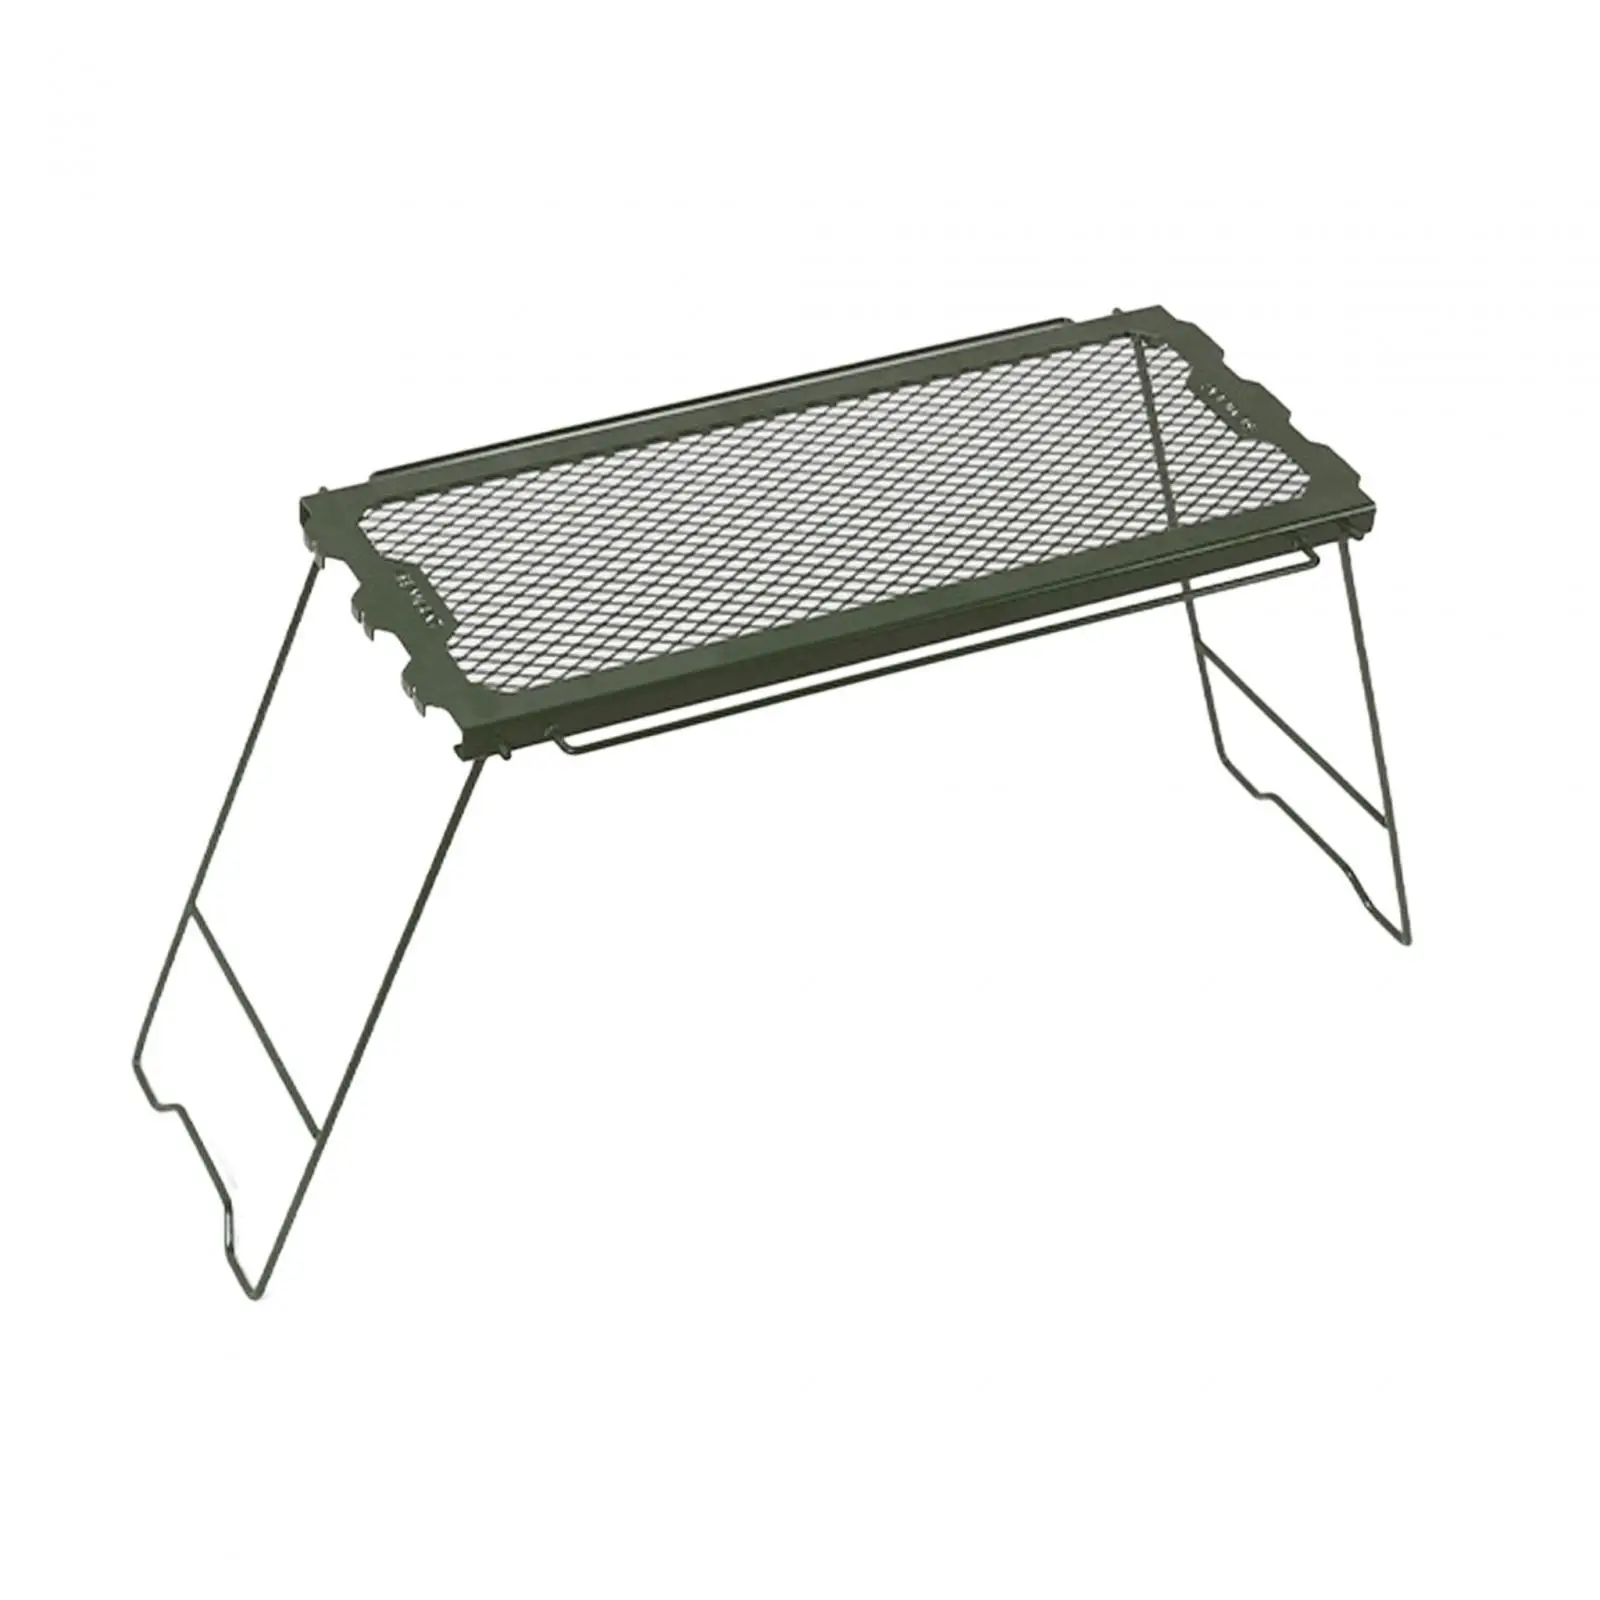 Folding Camping Table, Camping Cooking Grate, Portable Iron Storage Rack,